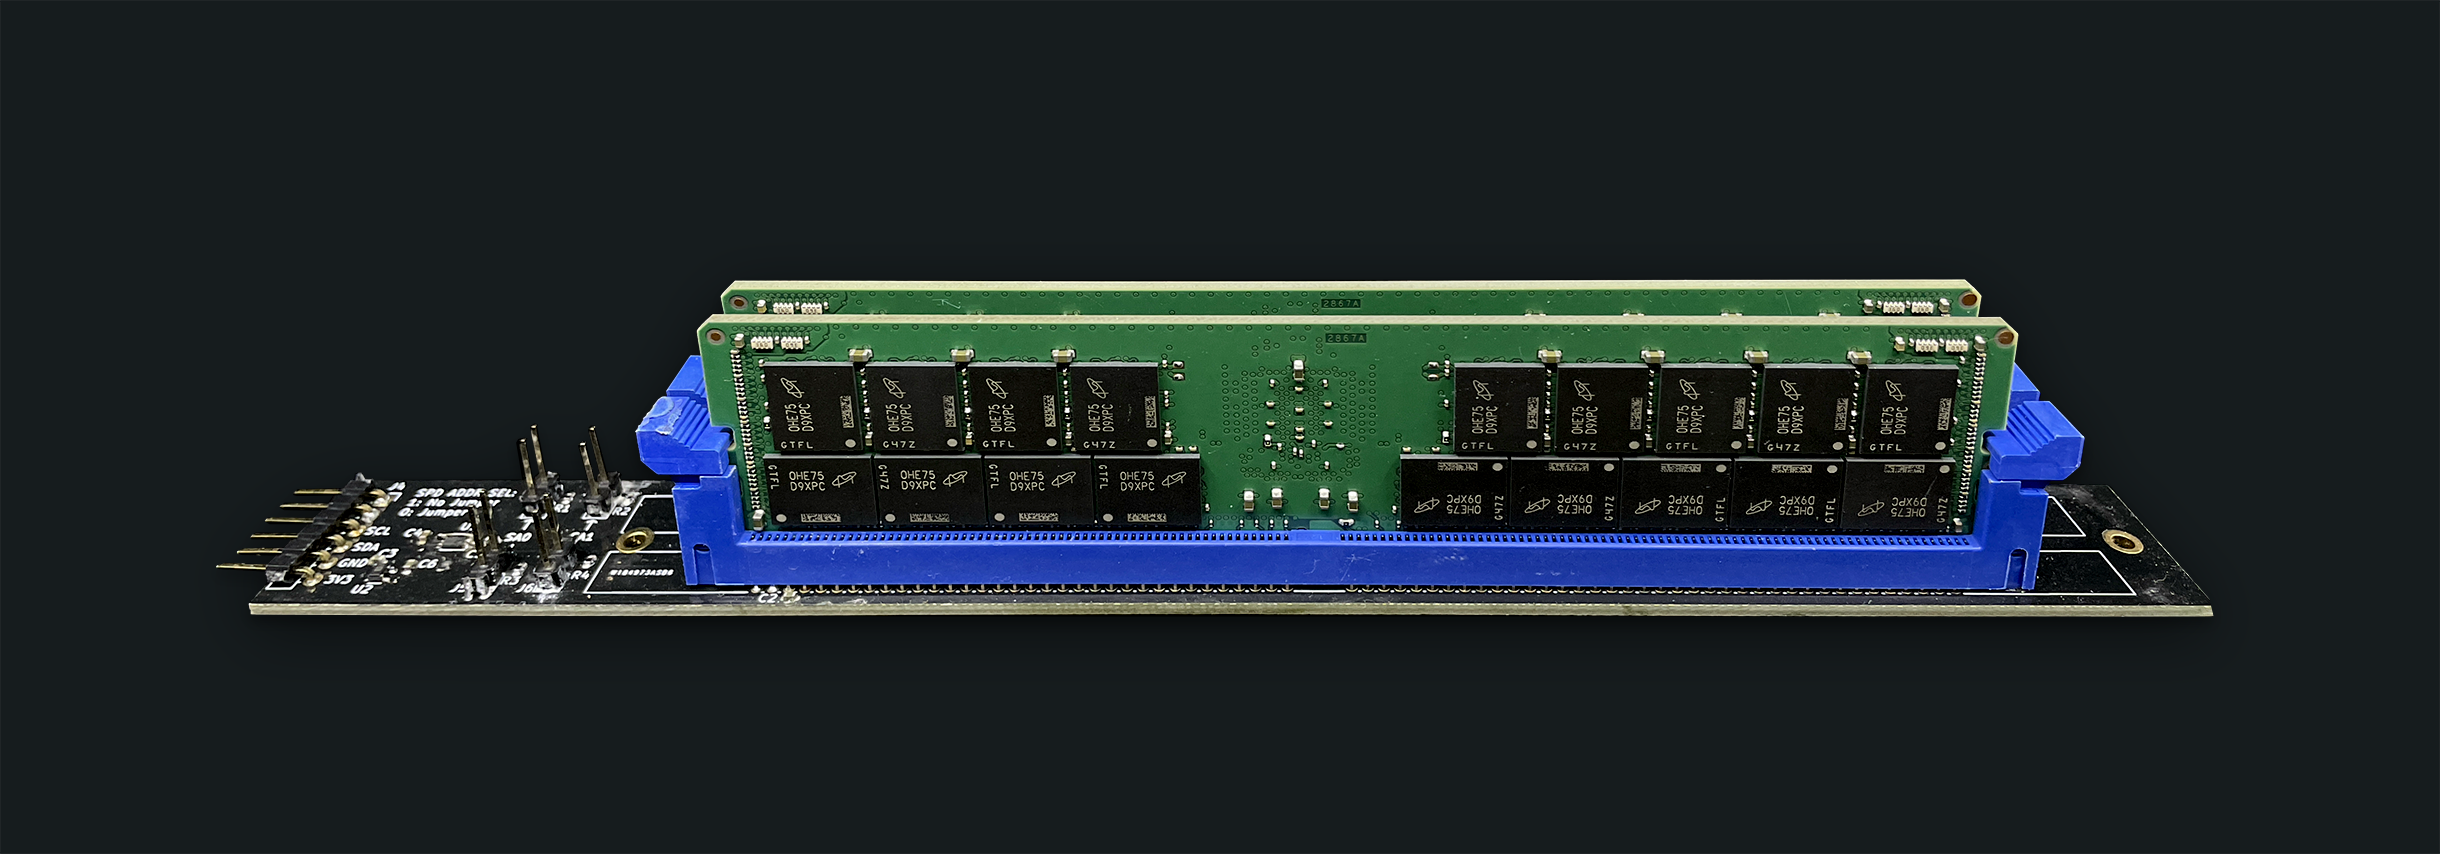 Narrow PMOD-interface board for interfacing with the SPD EEPROMs on the two installed DDR4 DIMMs